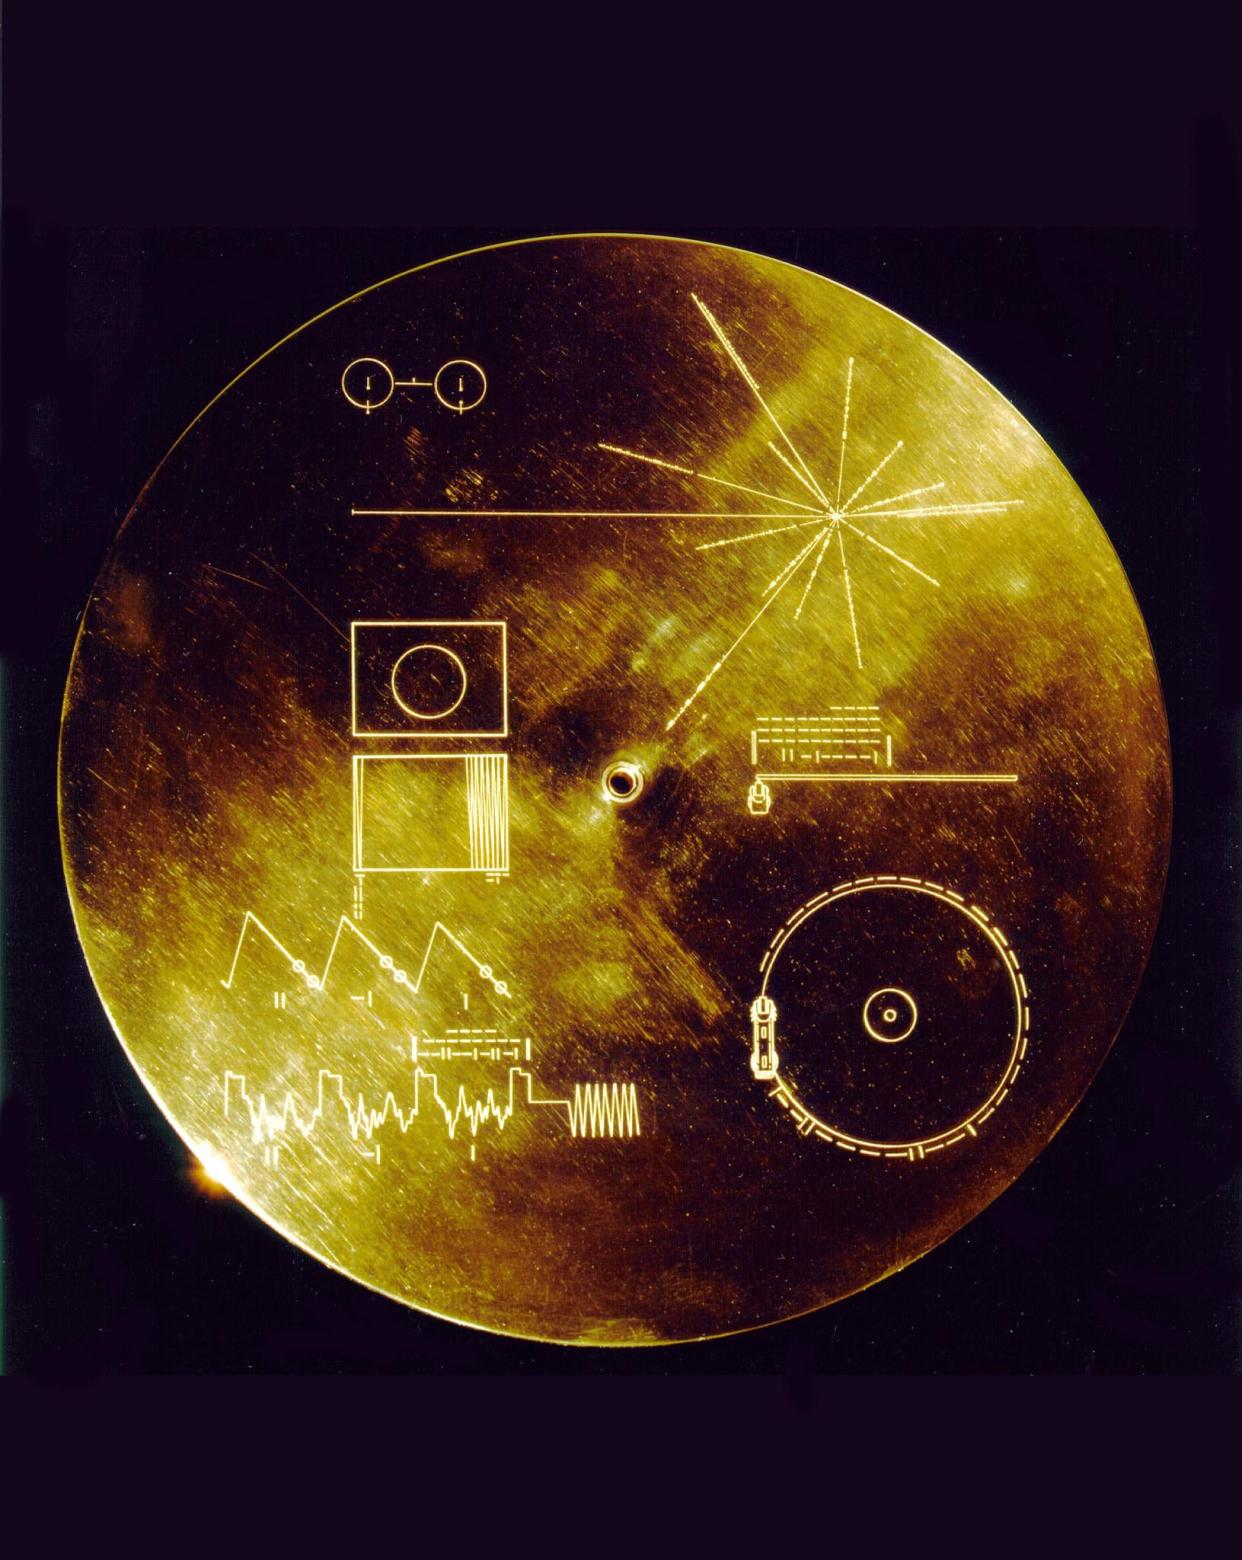 This 1977 NASA file image shows a gold aluminum cover that was designed to protect the Voyager 1 and 2 "Sounds of Earth" gold-plated records, which also provides the finder a key to playing the record. The identical "golden" records are carrying the story of Earth far into deep space.